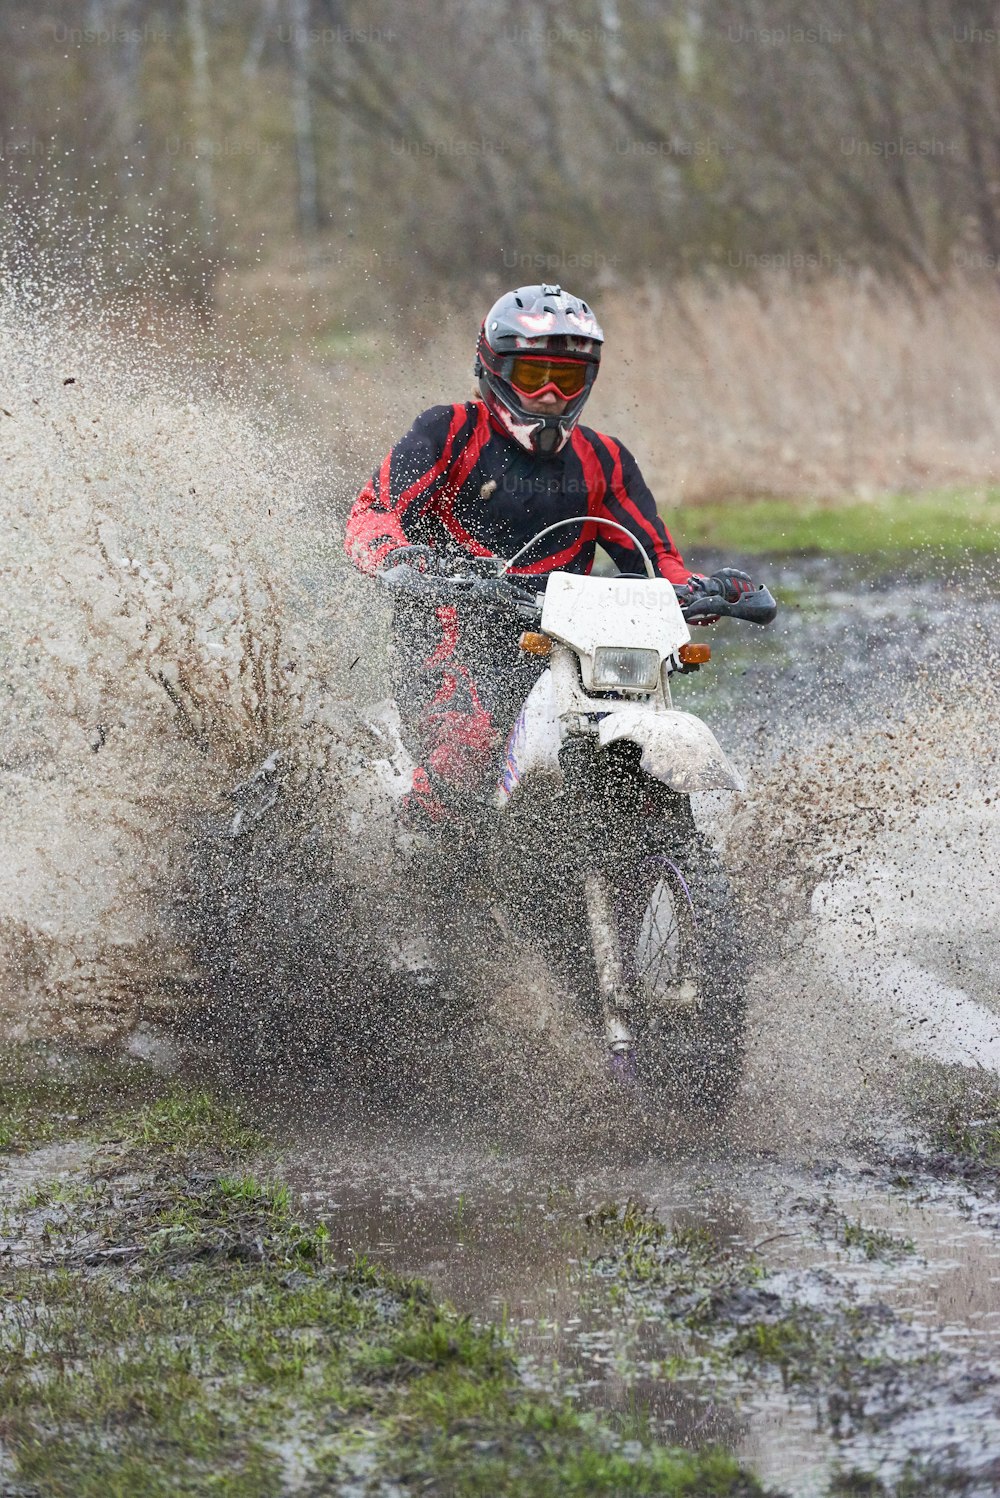 Extreme racing on mud track where skilled man riding in puddle